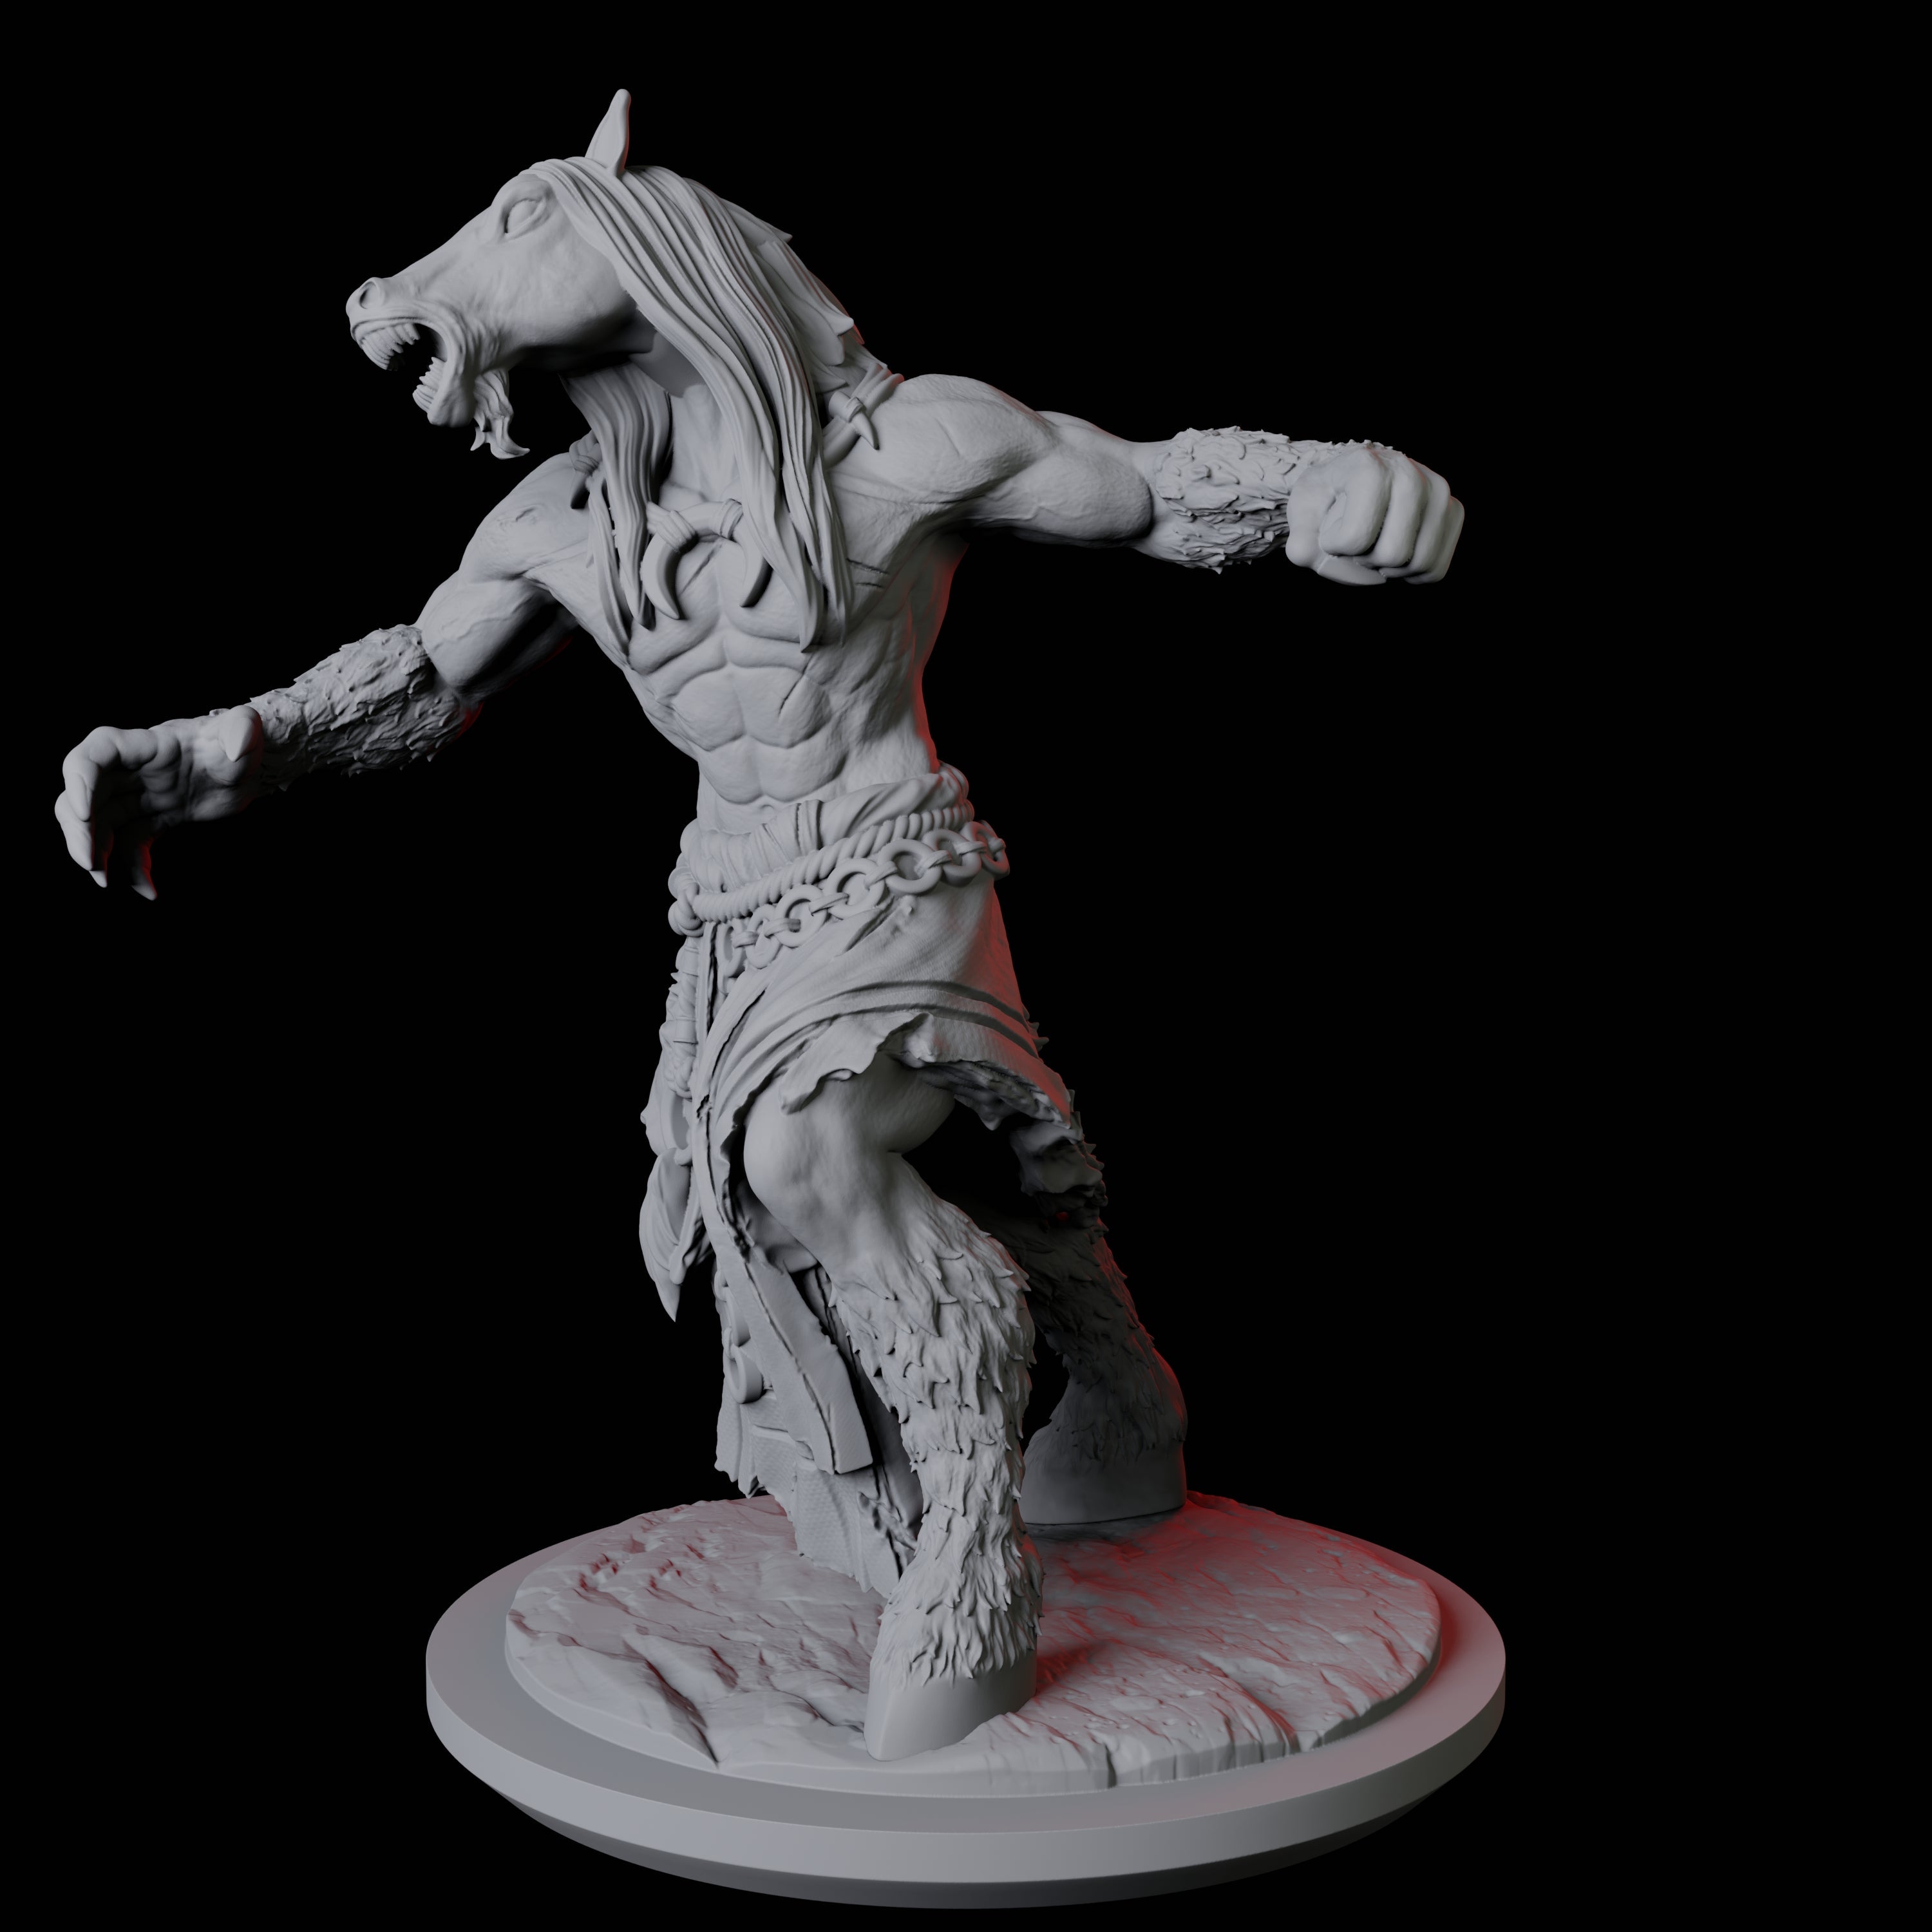 Neighing Reverse Centaur B Miniature for Dungeons and Dragons, Pathfinder or other TTRPGs